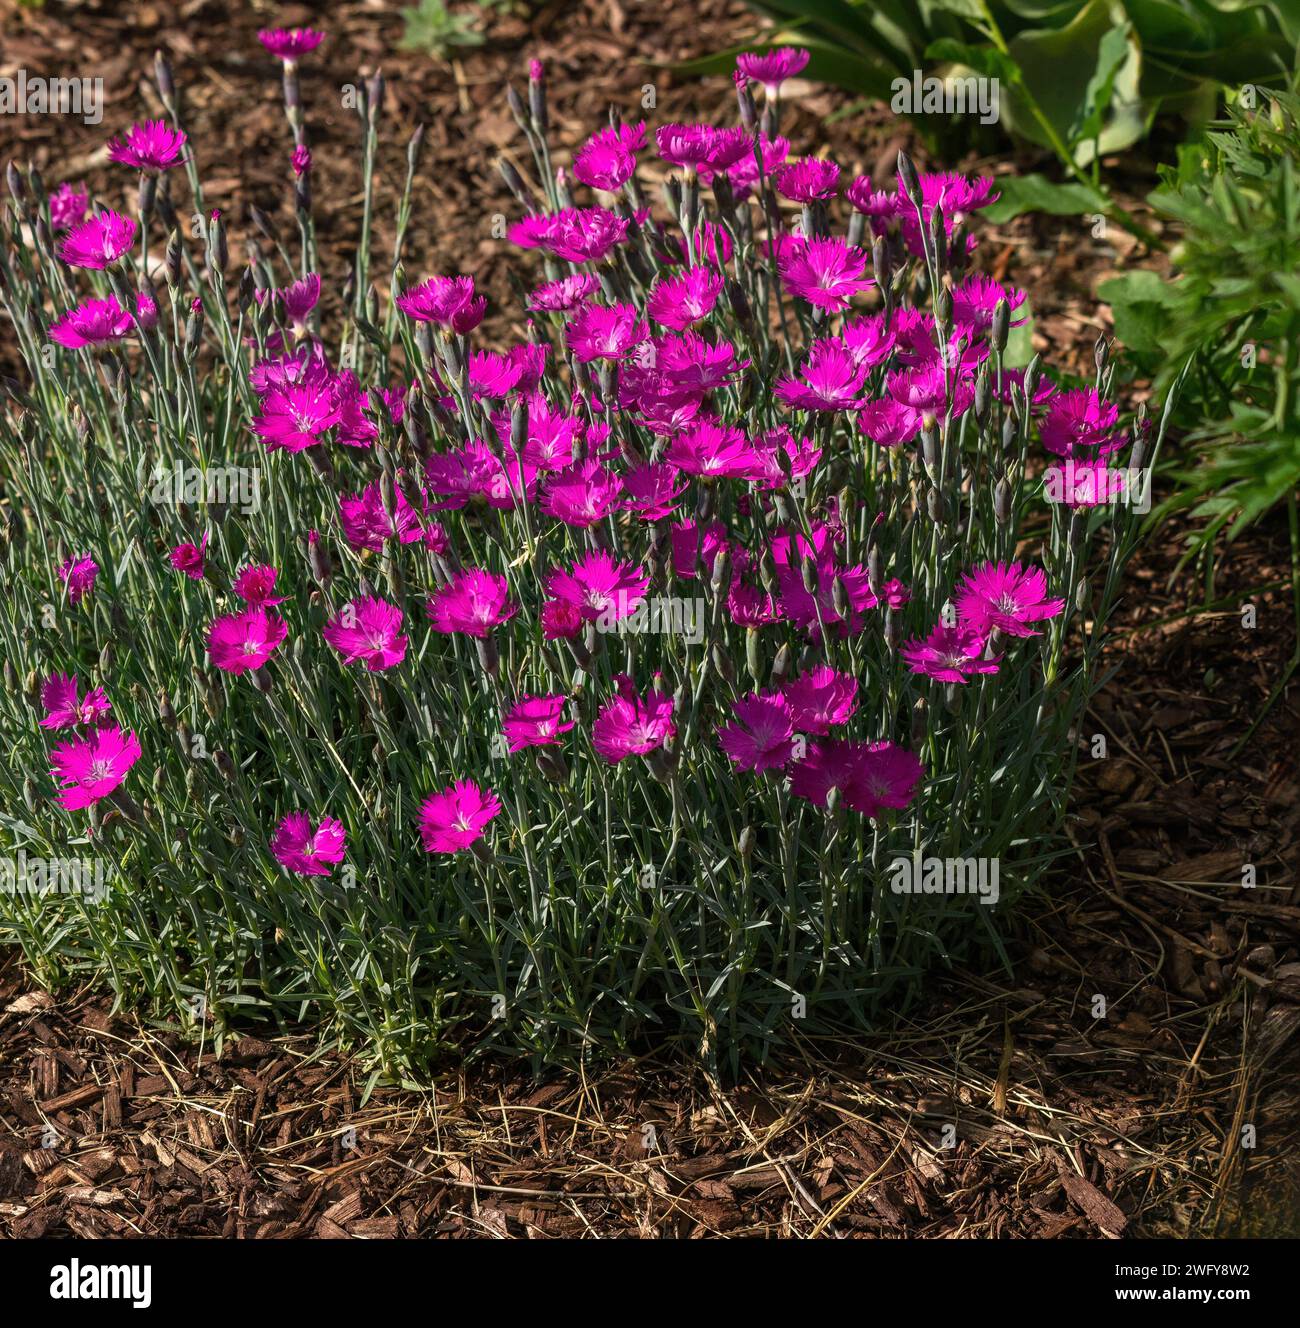 Dianthus plant with colorful pink flowers blooming in a mulched garden. Stock Photo